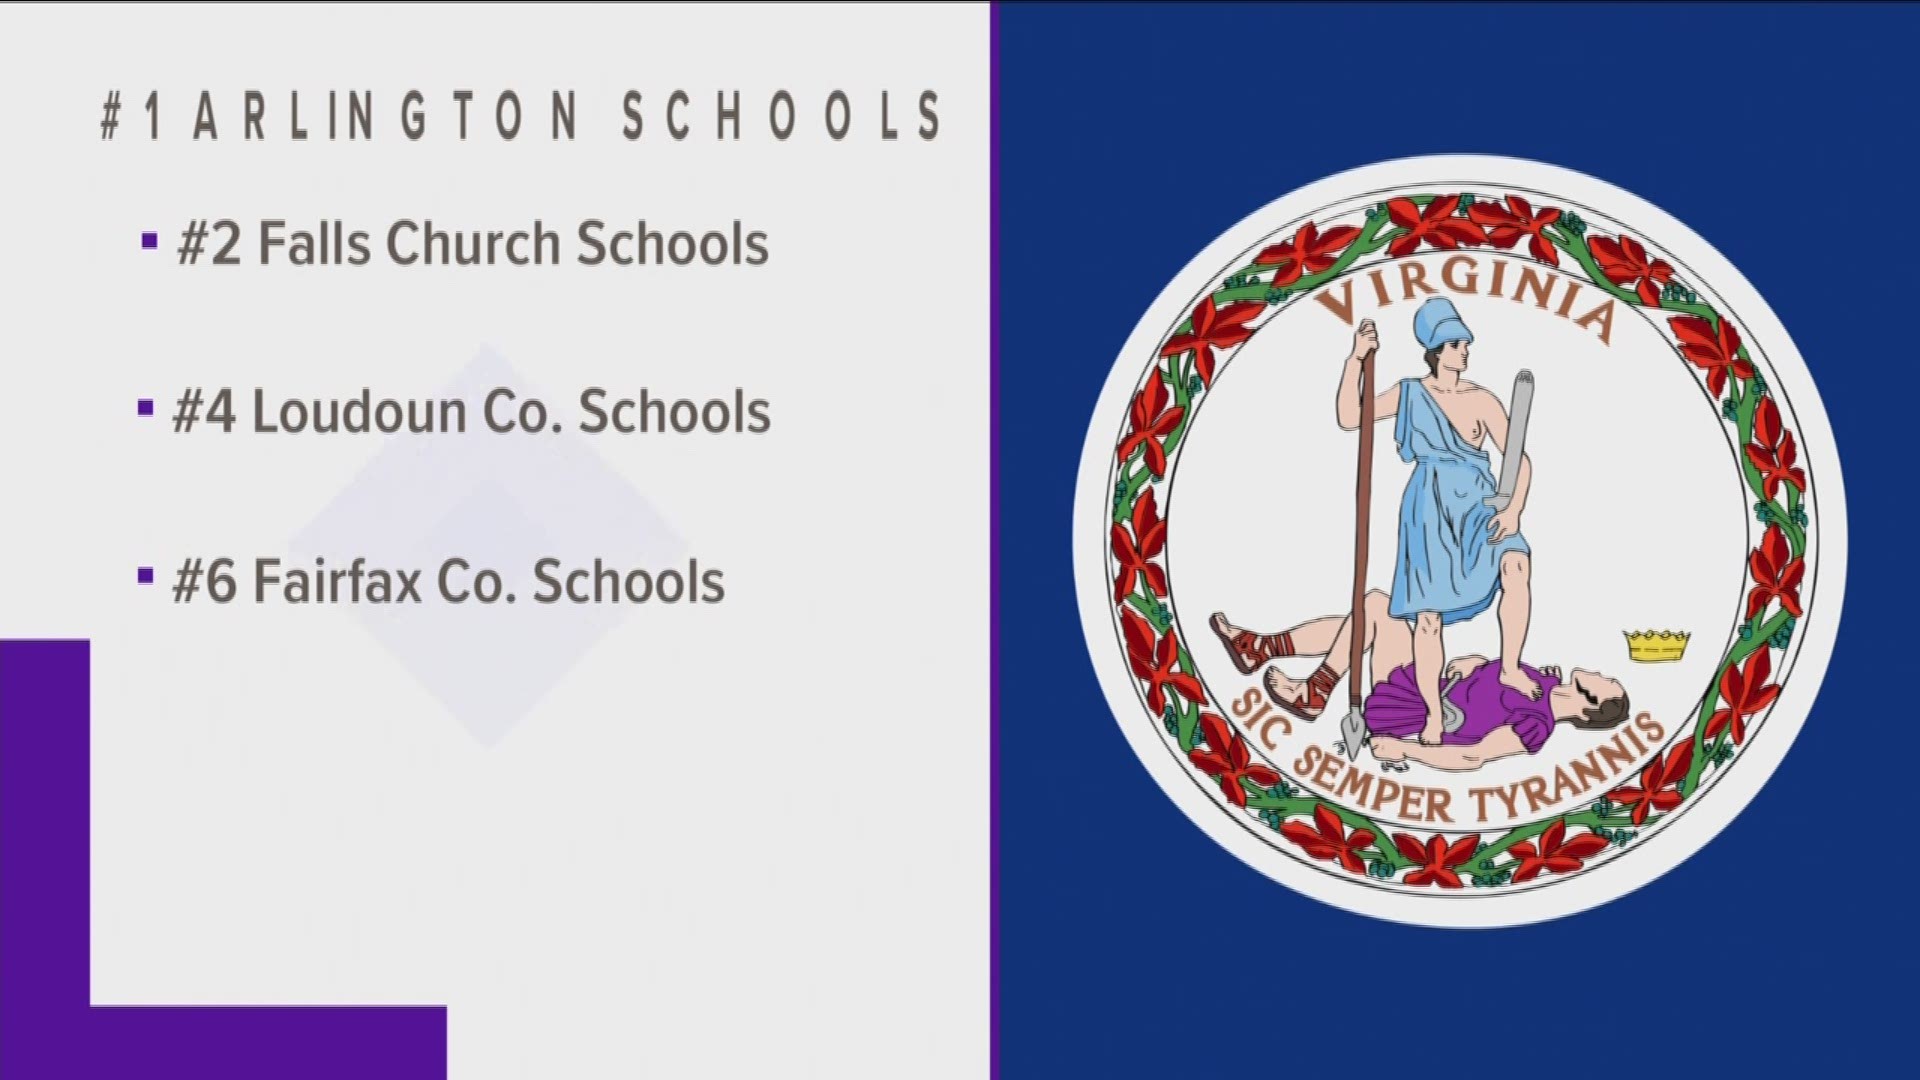 For the second year in a row, Arlington Public Schools has been named the top school system in Virginia. The ranking site Niche gave Arlington Schools and three other Northern Virginia districts an A+ rating.